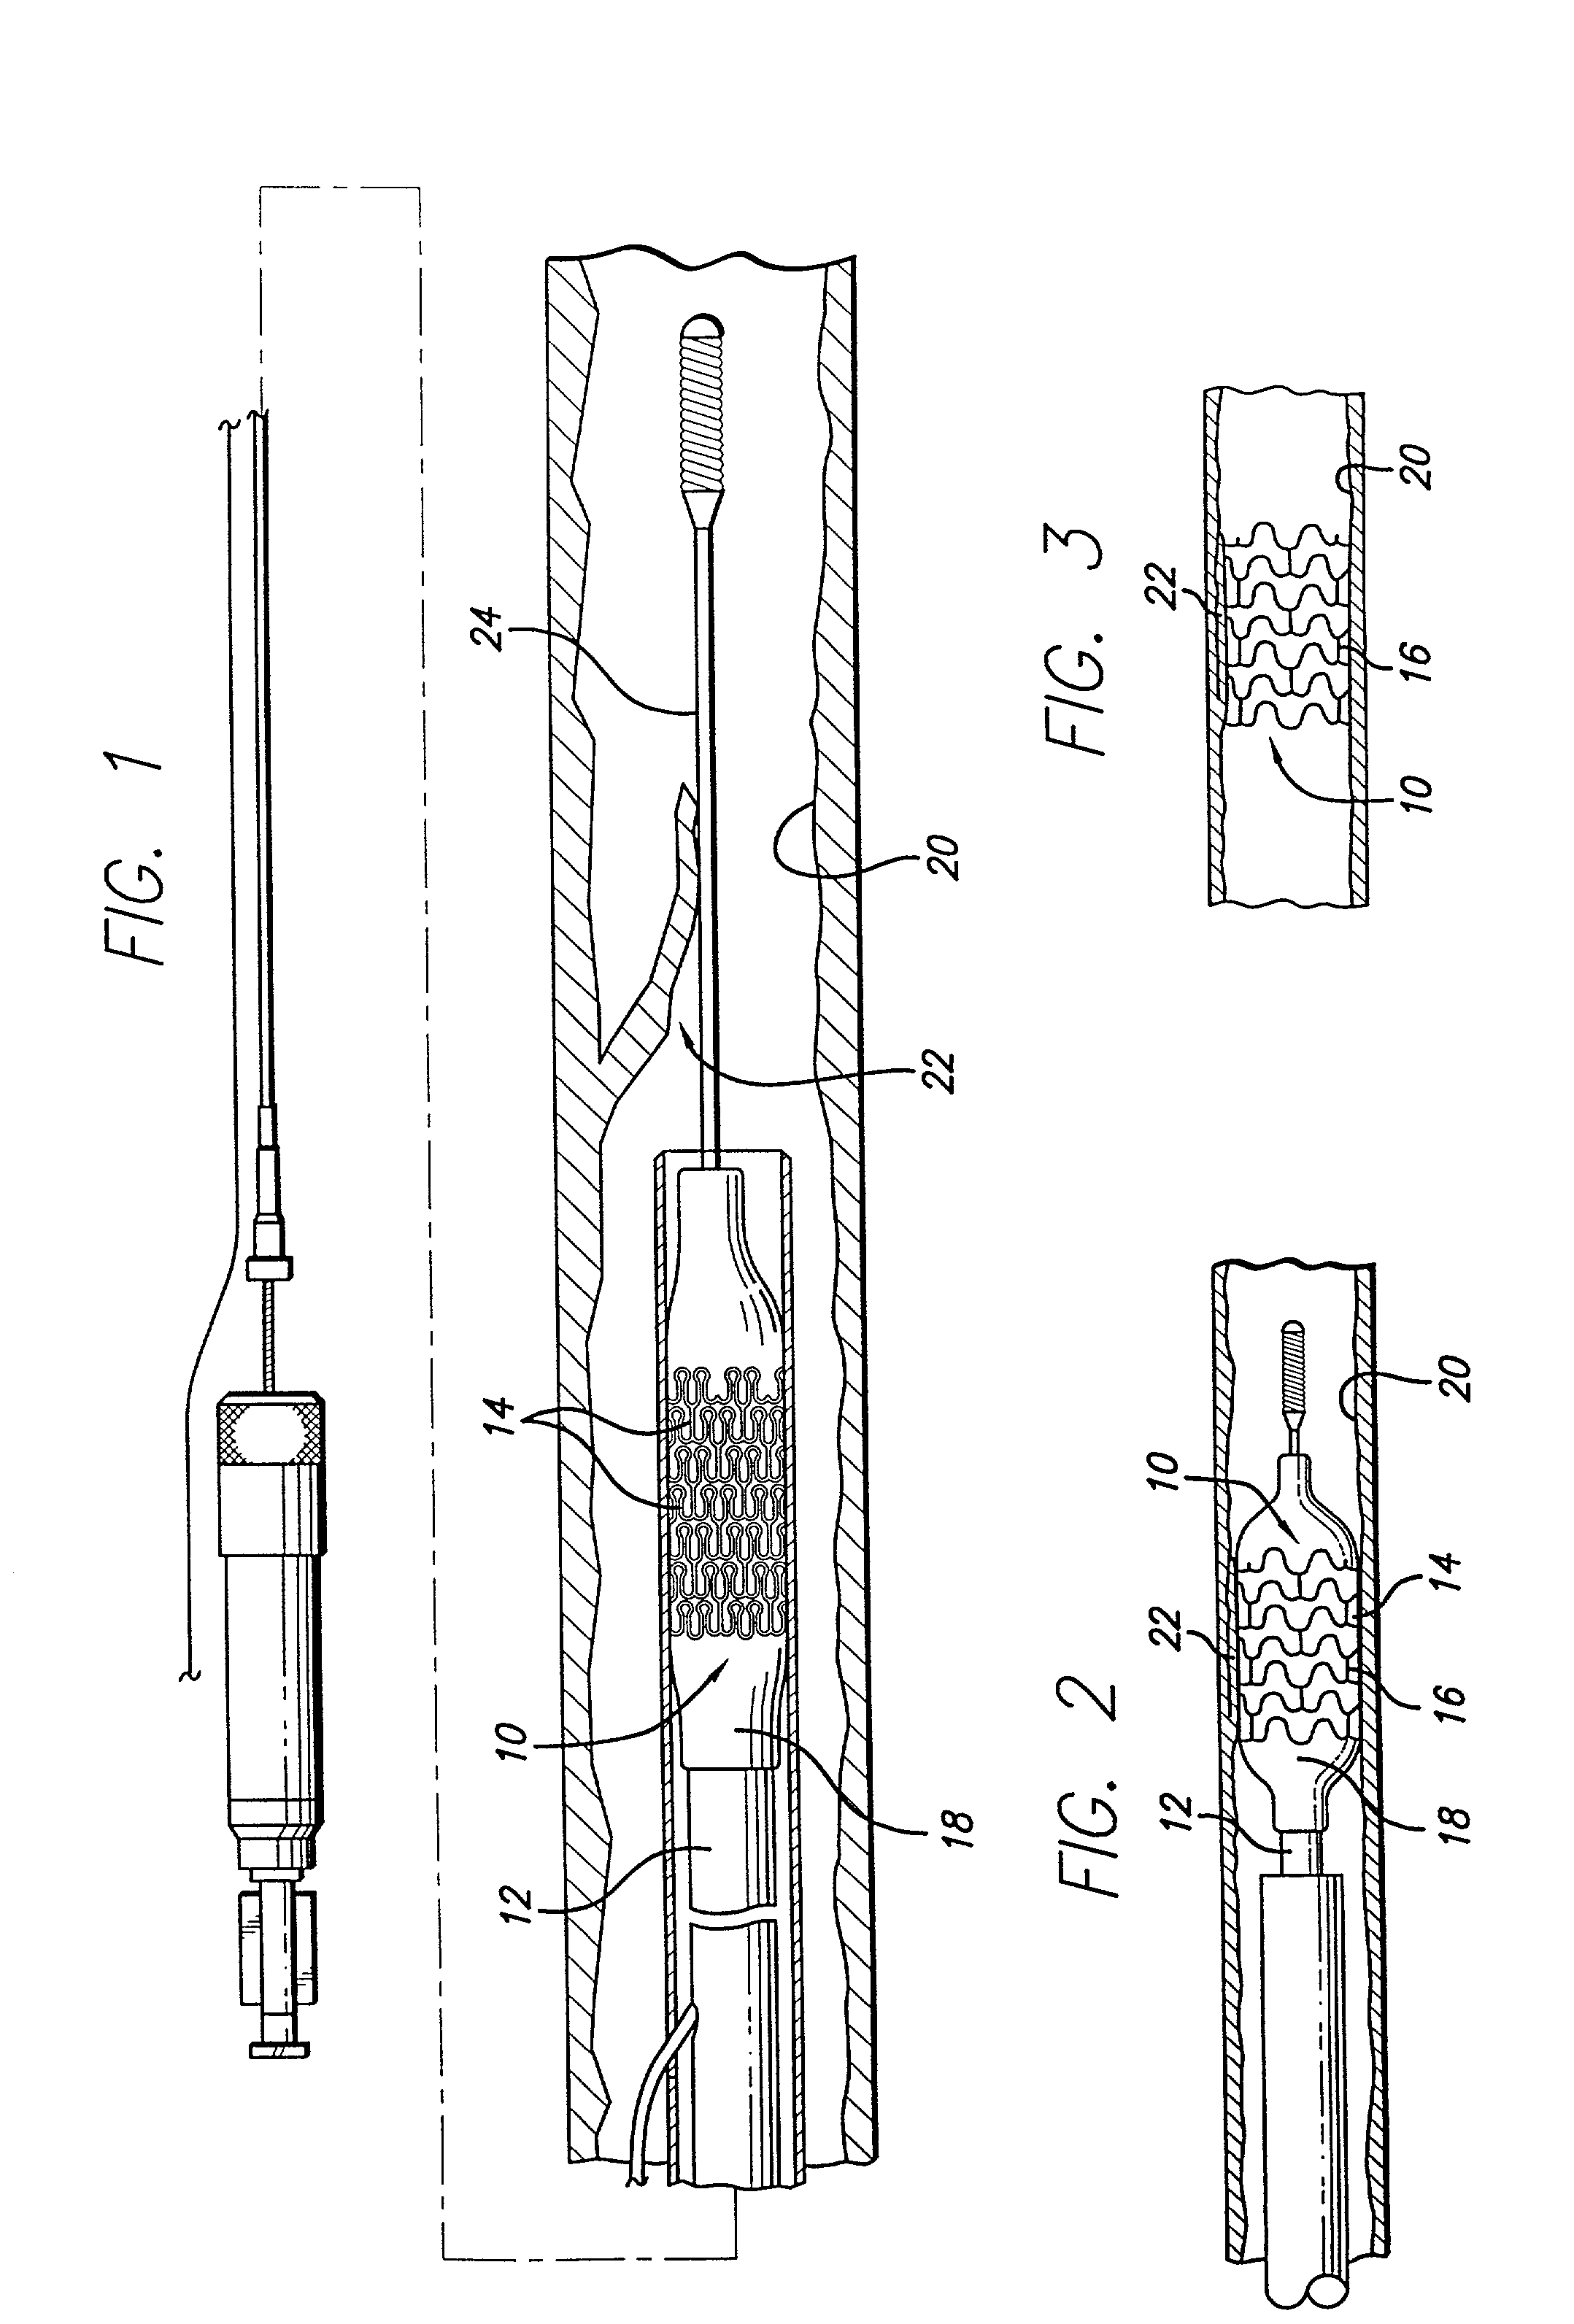 System and method for improved stent retention